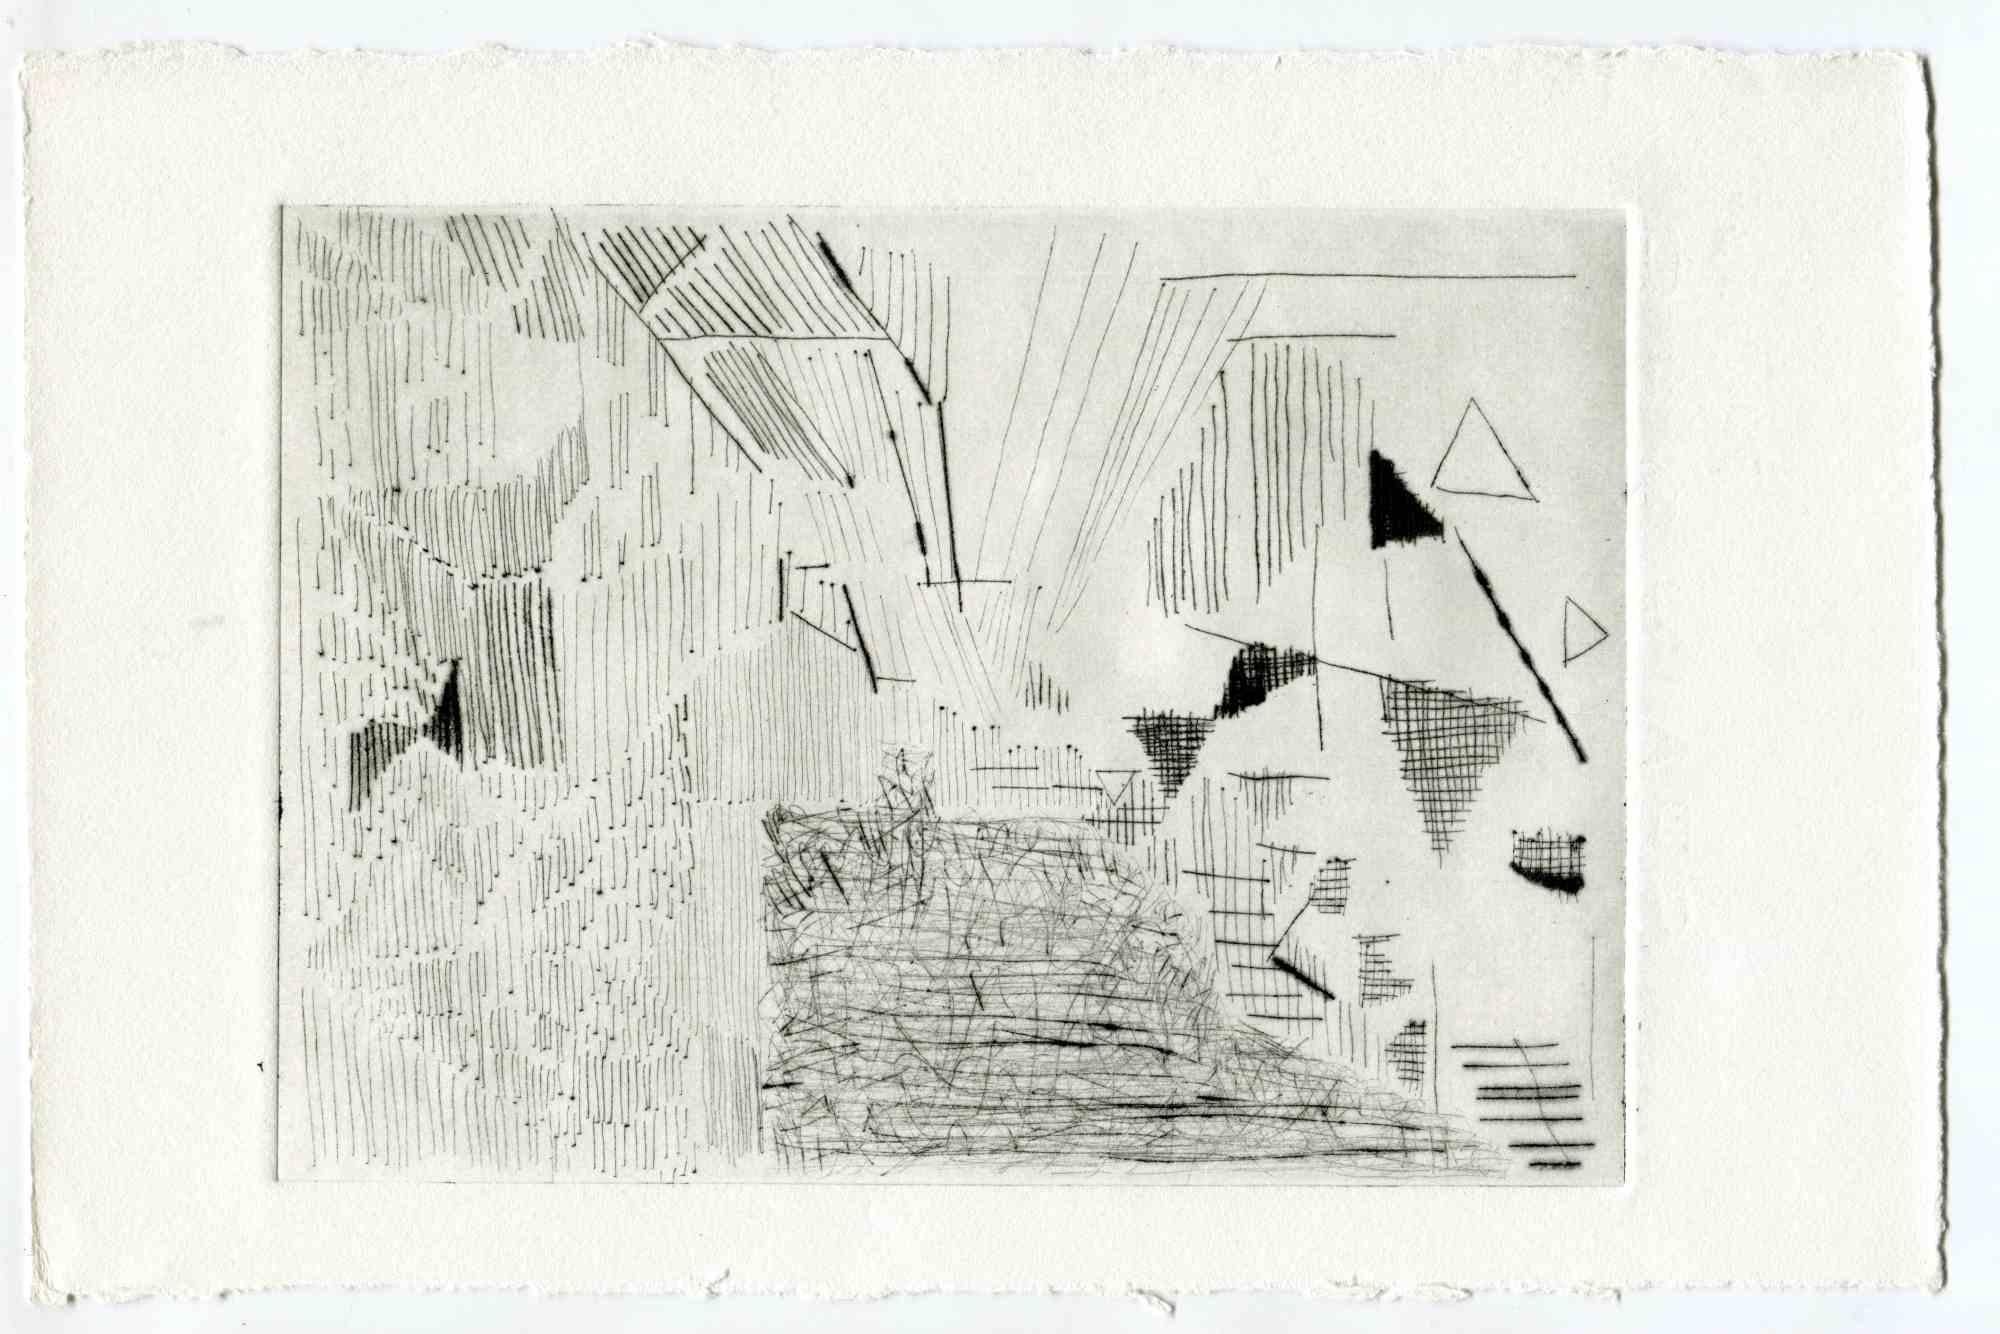 Unknown Figurative Print - Abstract Composition - Original Etching and Drypoint - Mid-20th Century